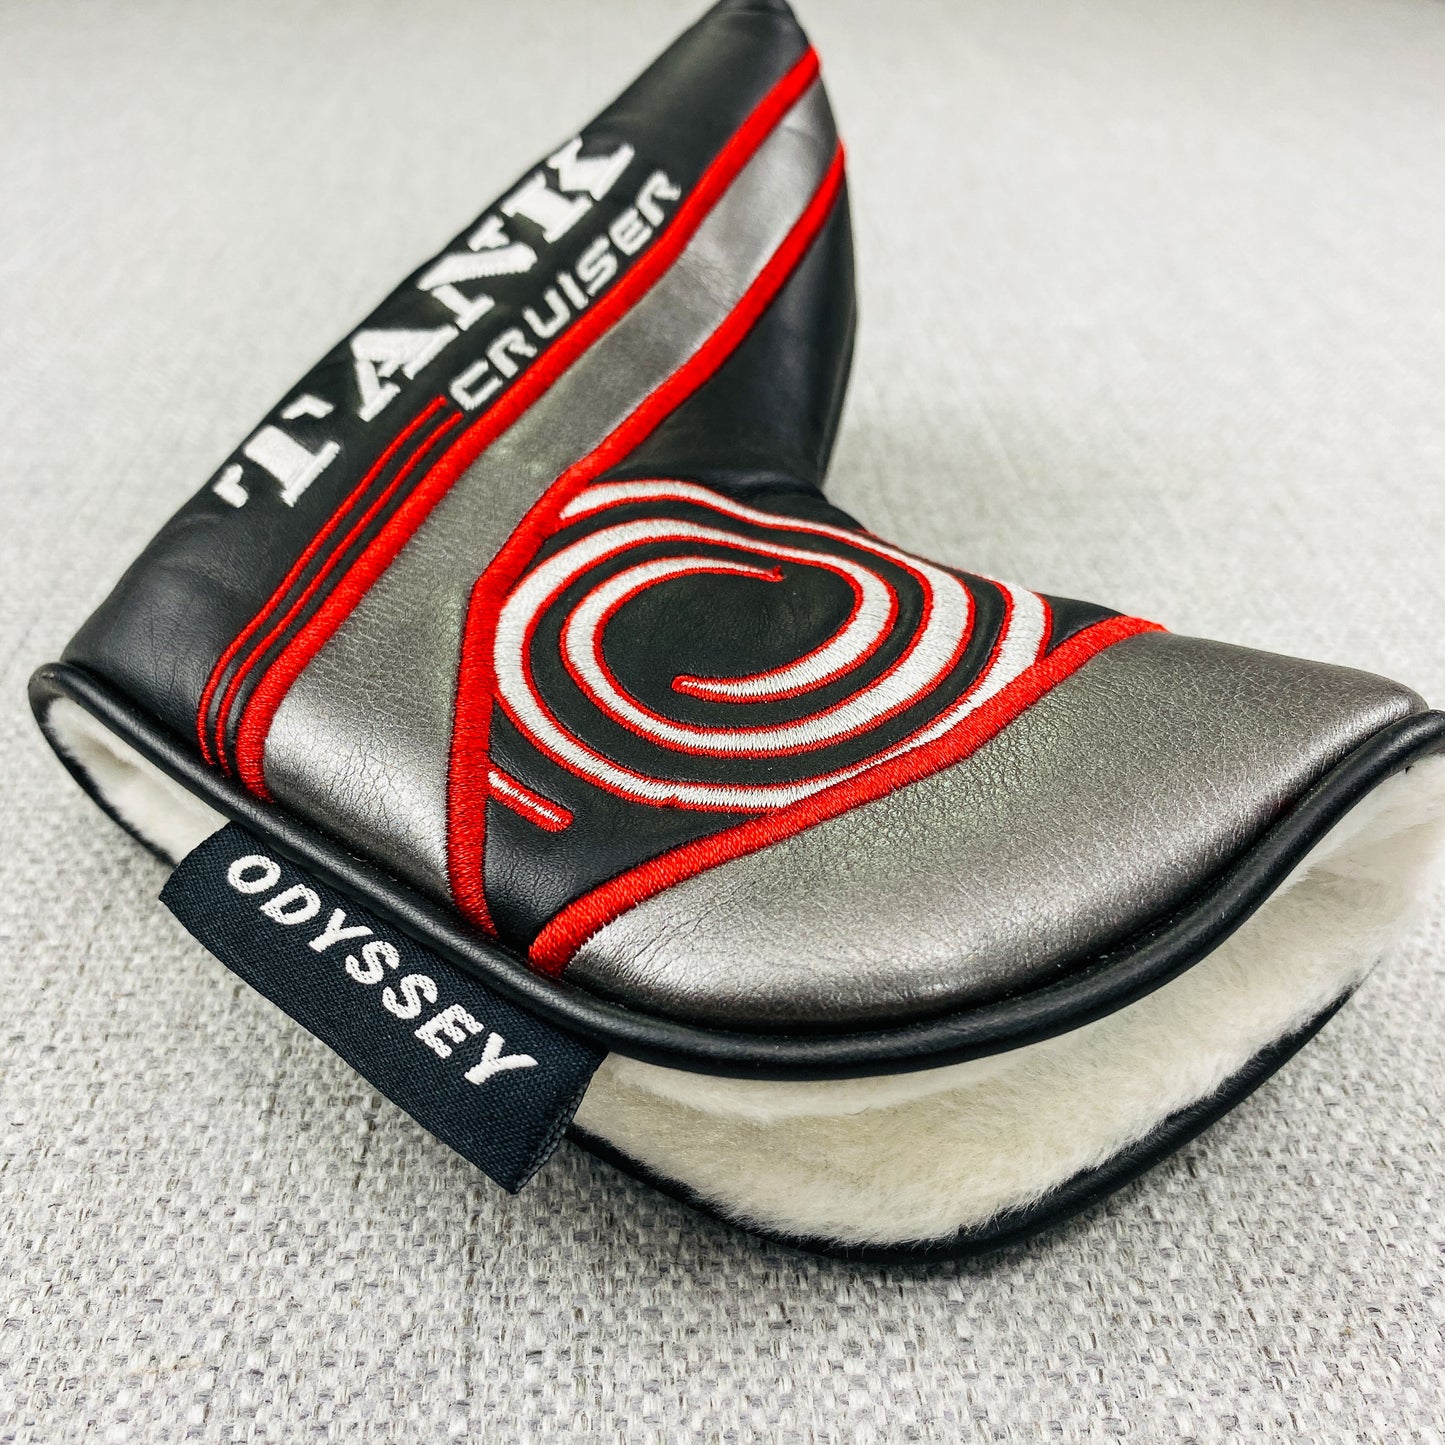 Odyssey TANK Cruiser Blade Putter Head-Cover. As New.